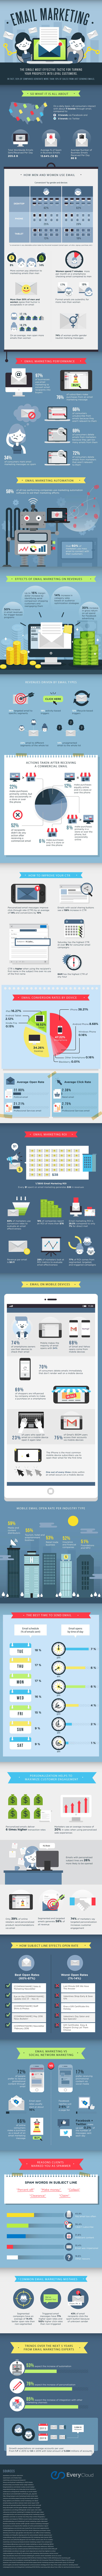 email_marketing-infographic